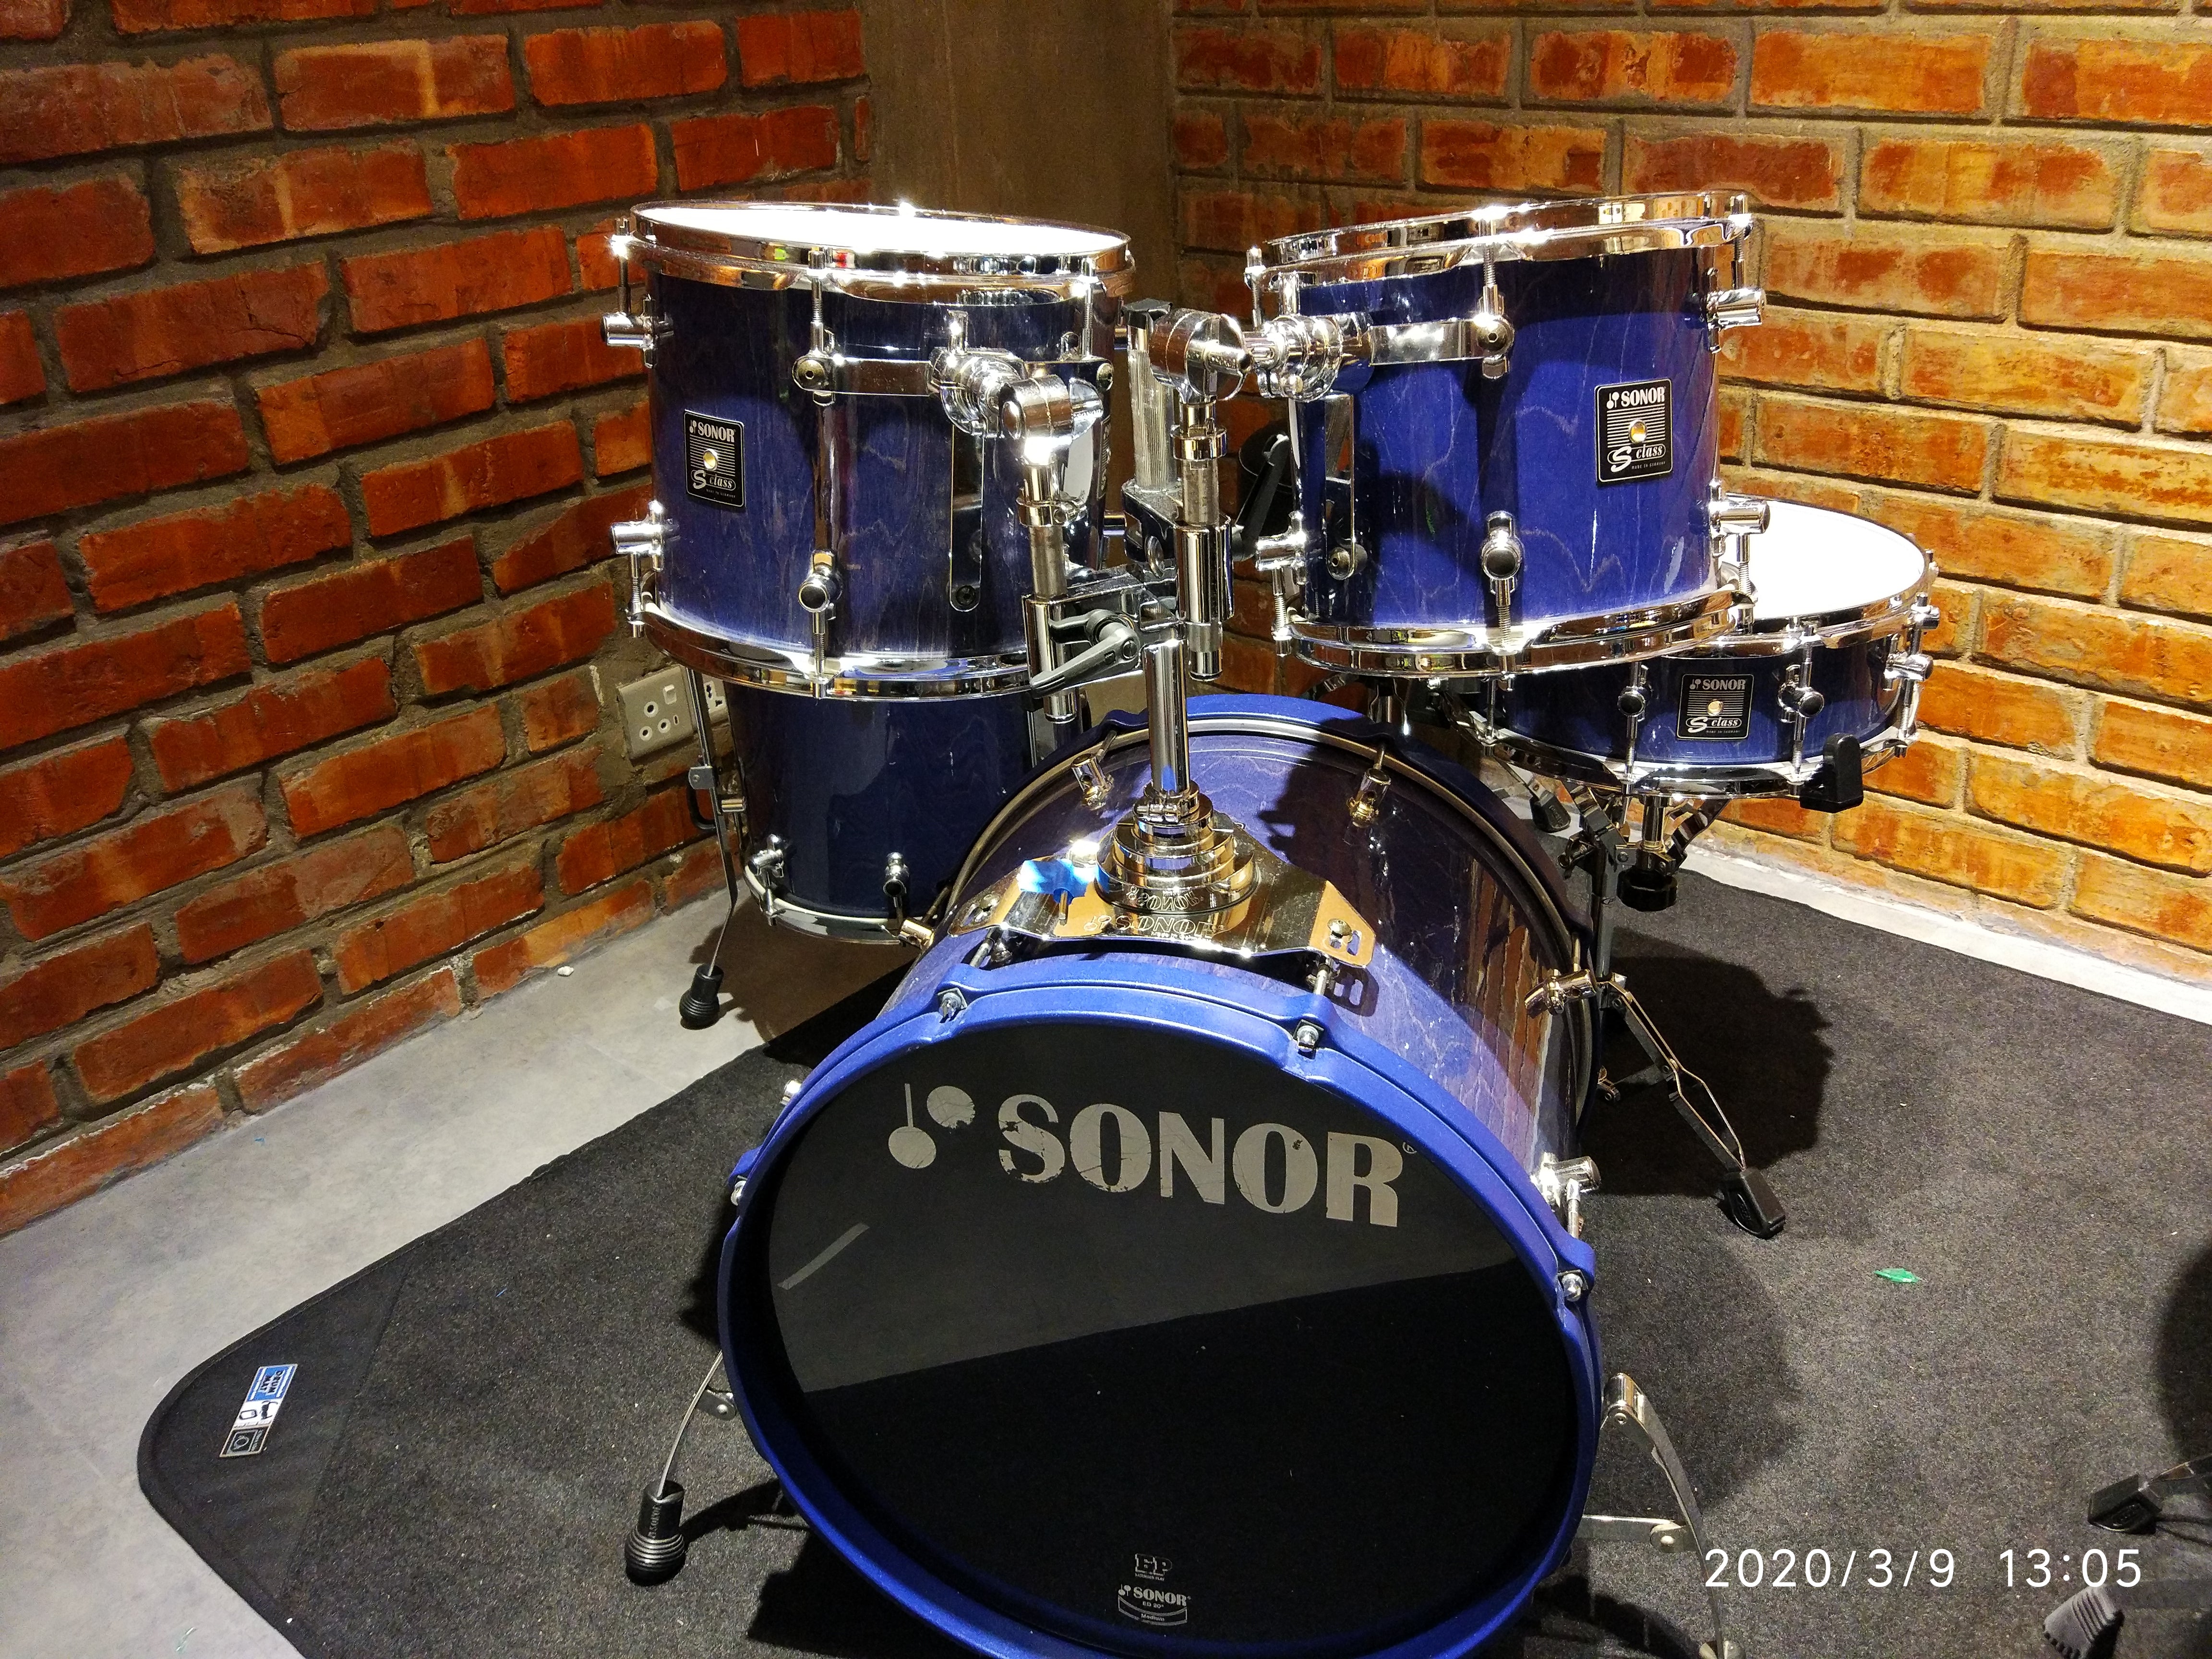 Sonor Drum Kit, Vintage 1980s, S Class Blue Series. Made in Germany. Mint  Condition